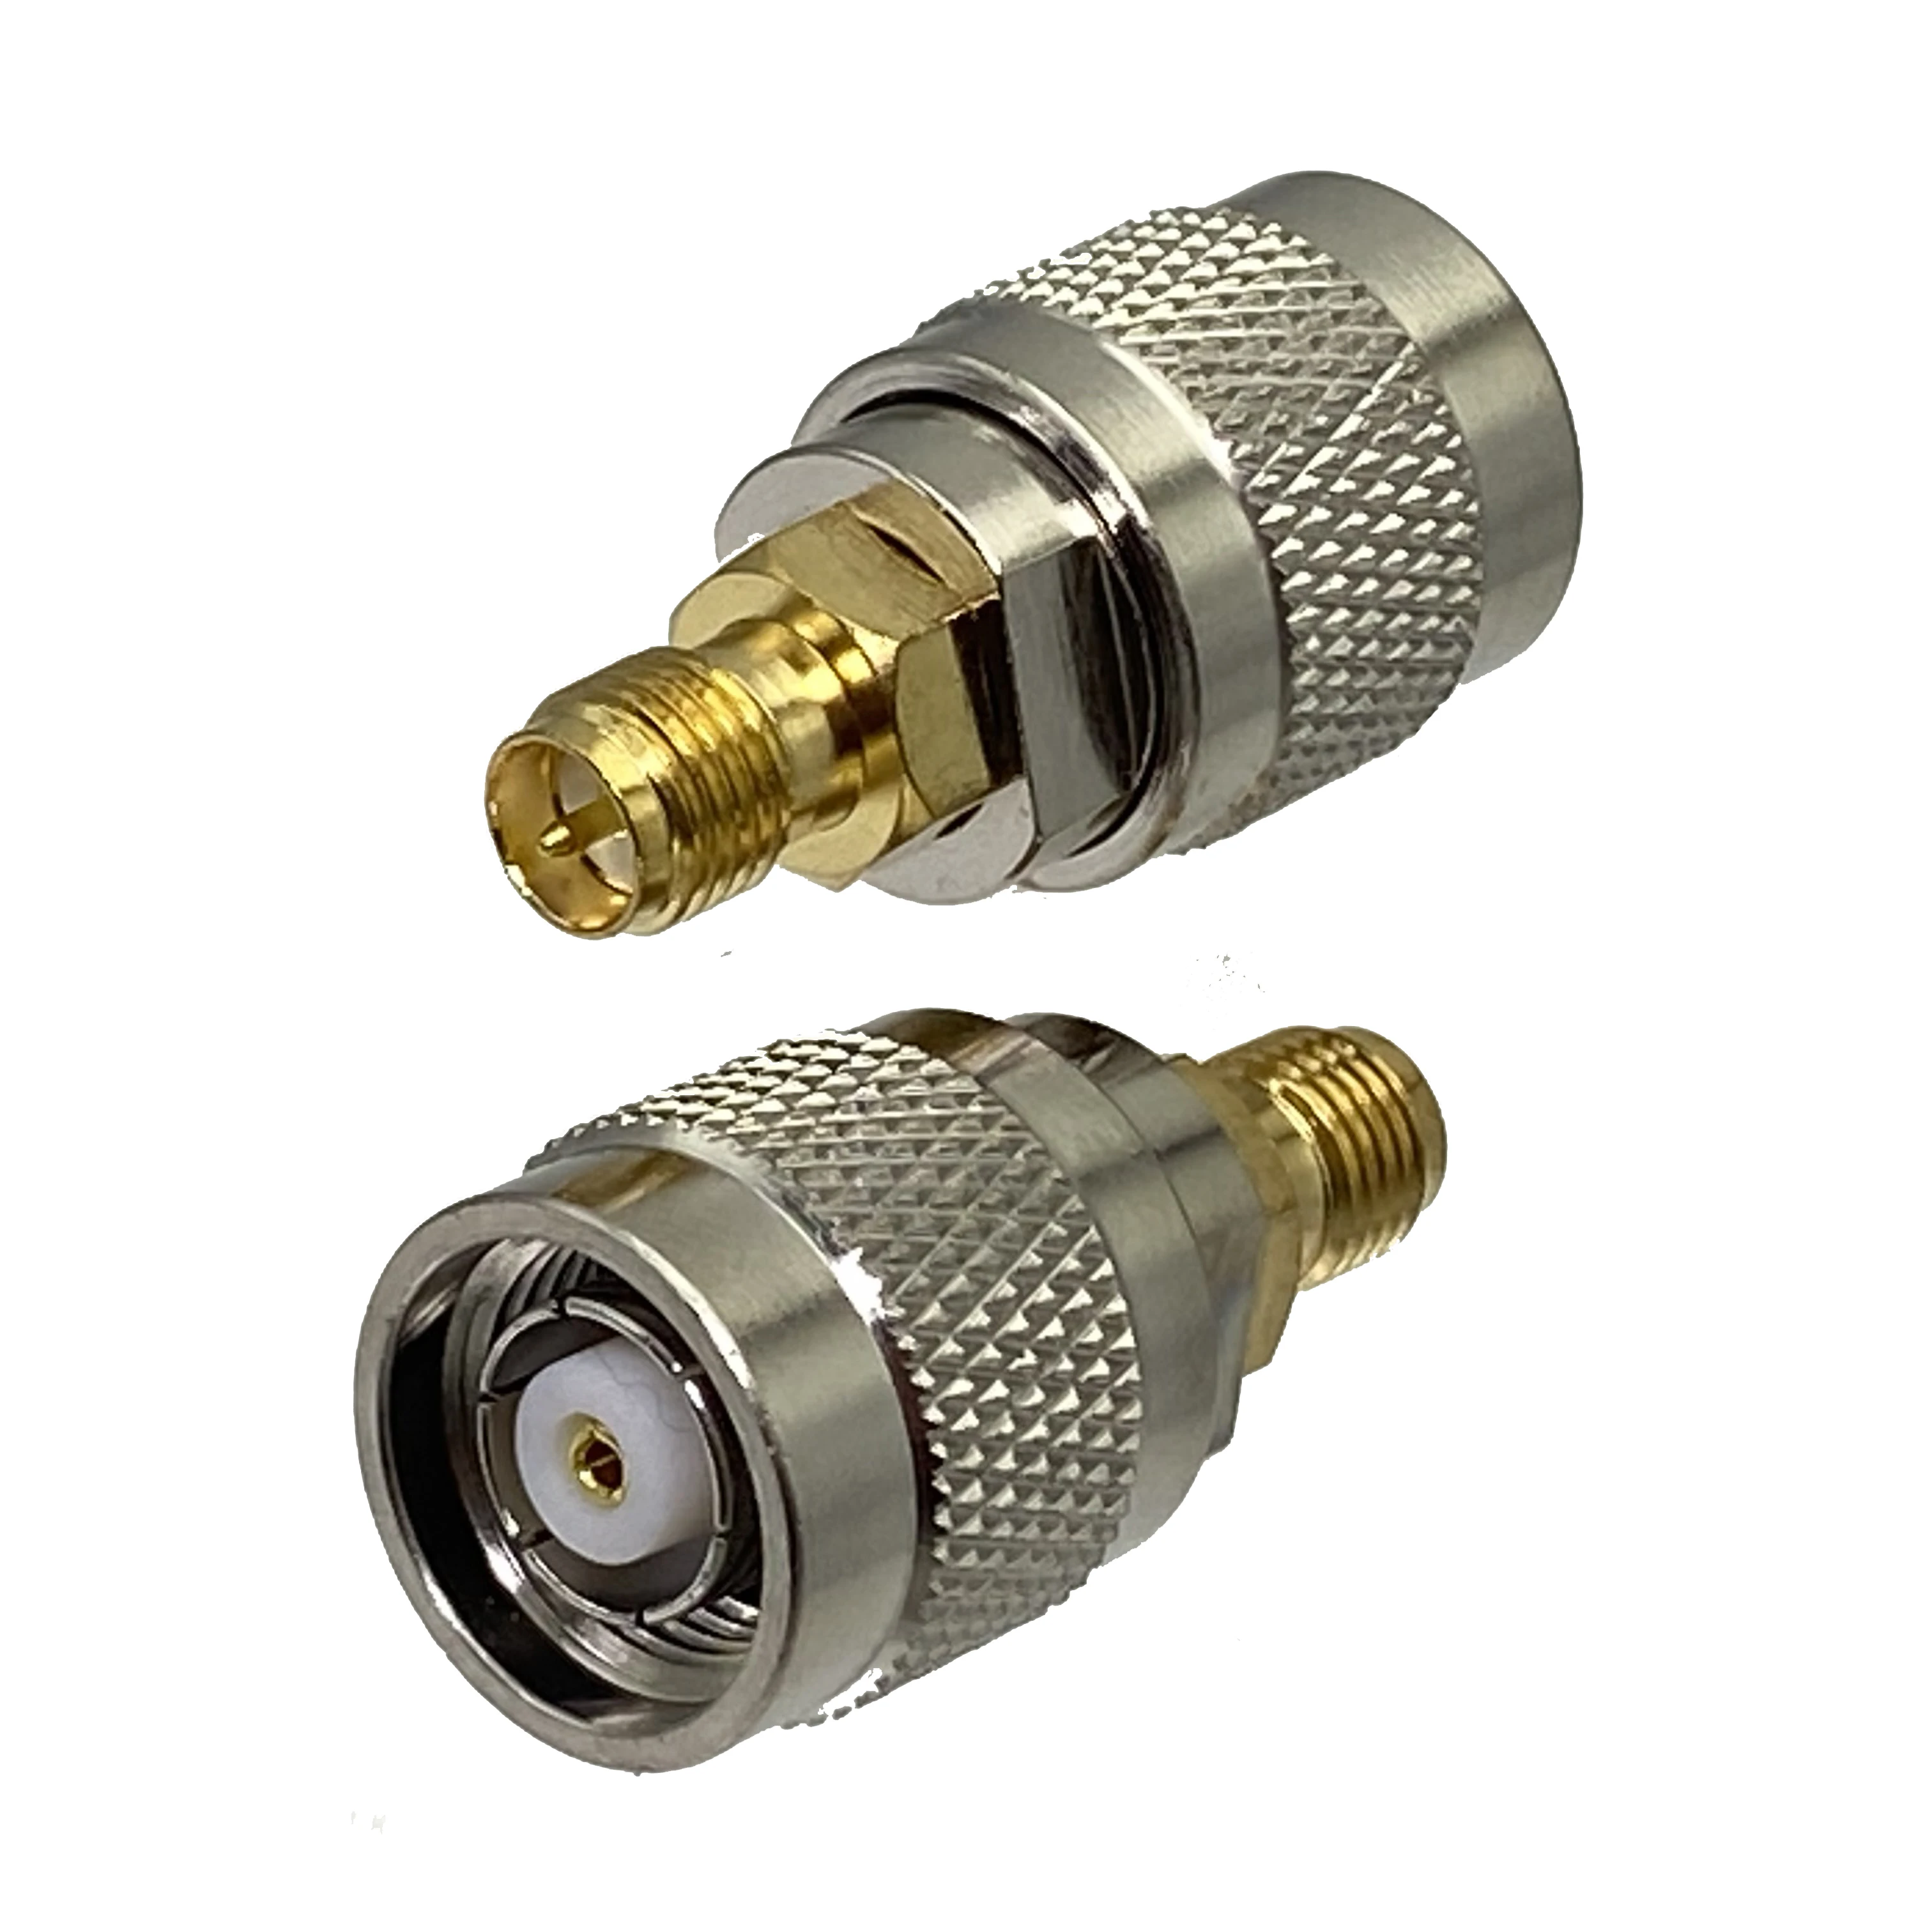 1pcs Connector Adapter RP-TNC Male Jack to RP-SMA Female Plug RF Coaxial Converter Straight New